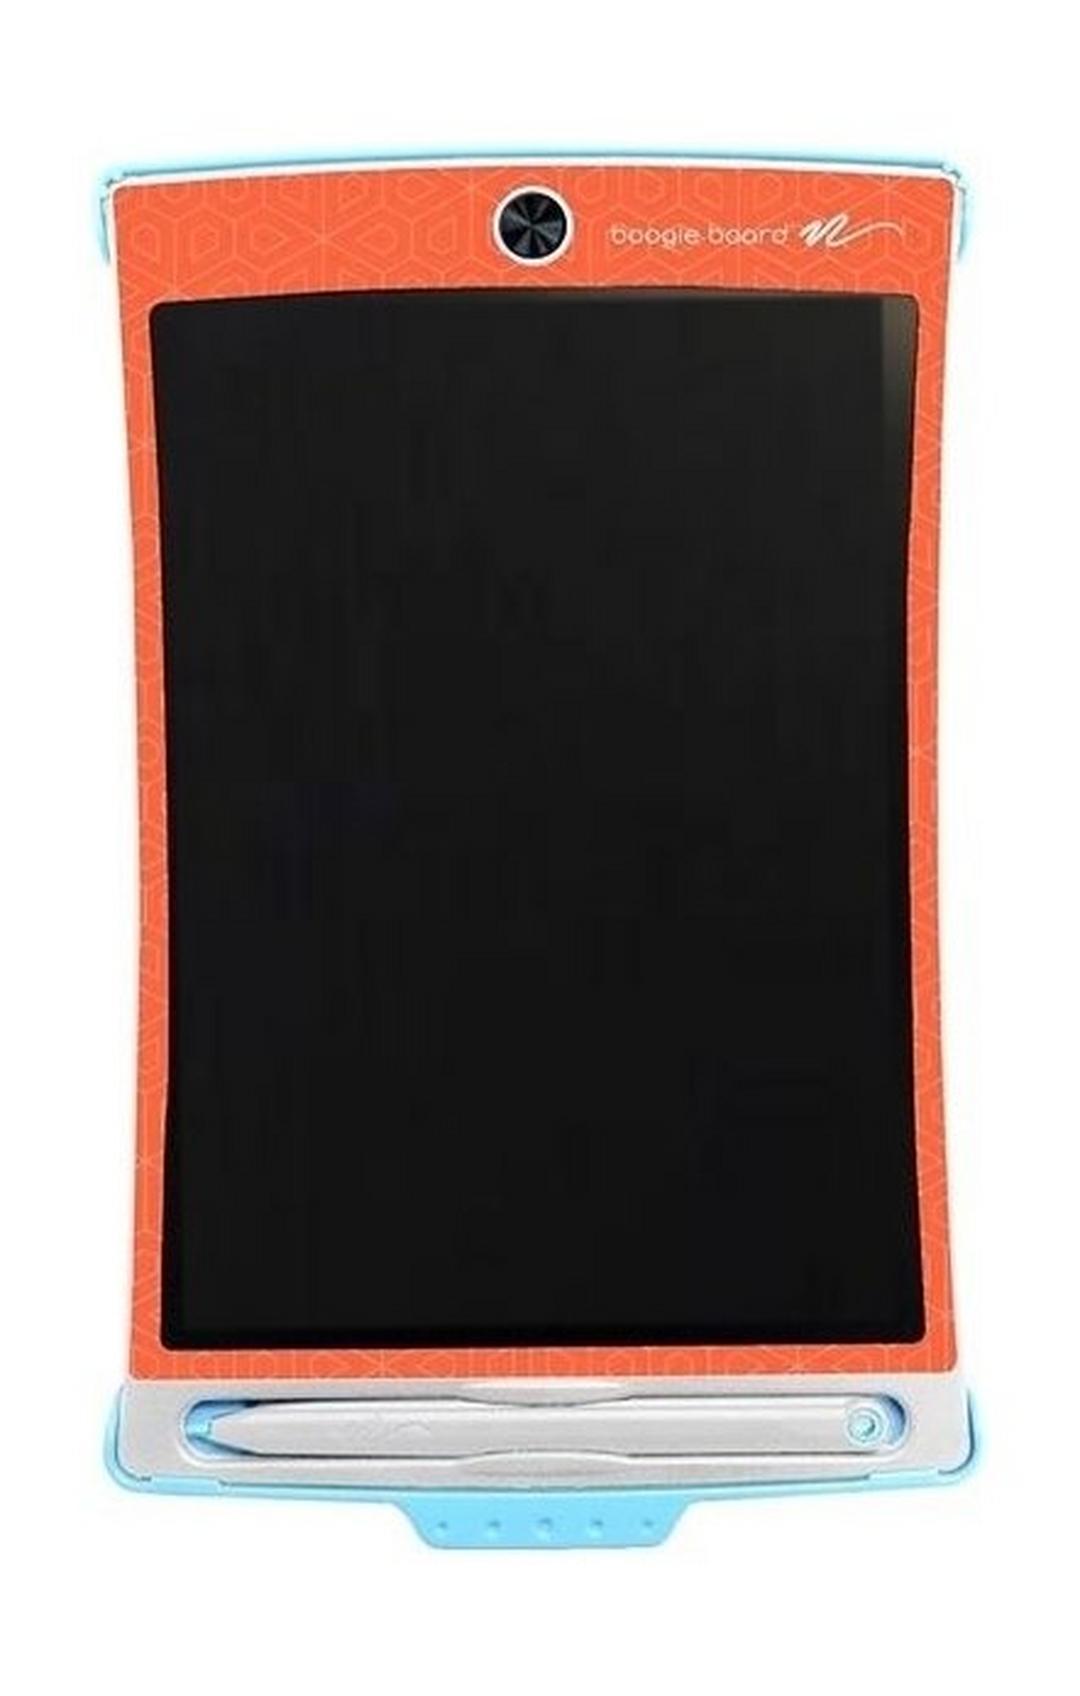 Boogie Board Jot 8.5-inch e-Writer with Cover - Orange